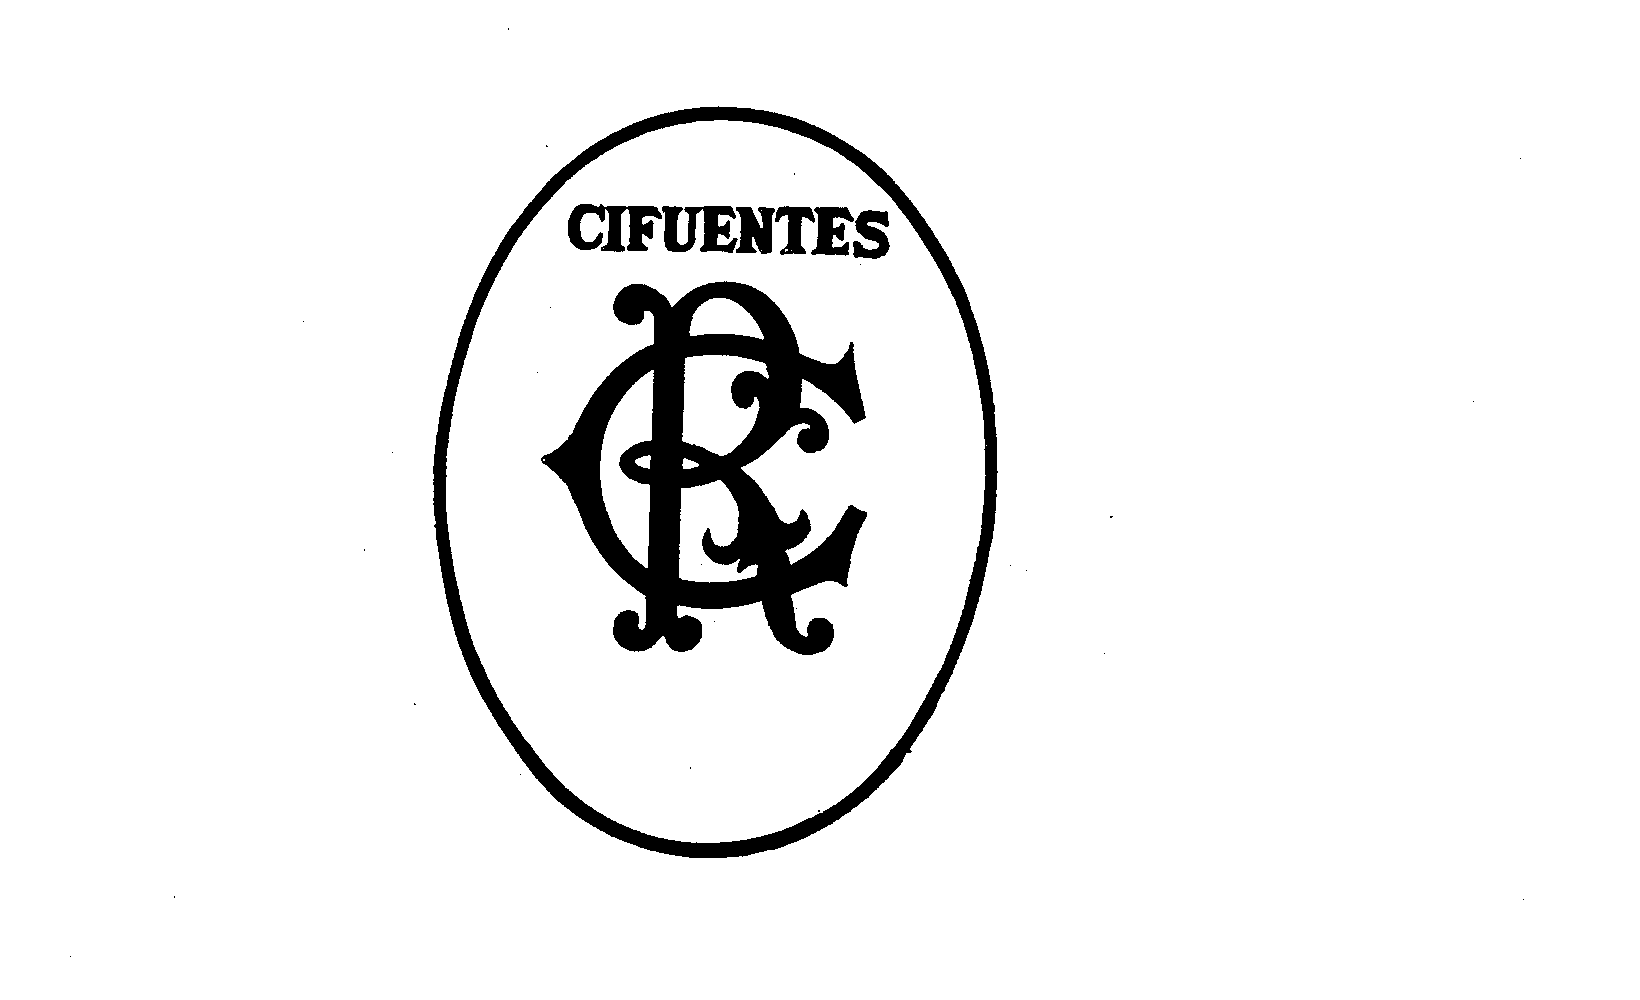  CIFUENTES RC